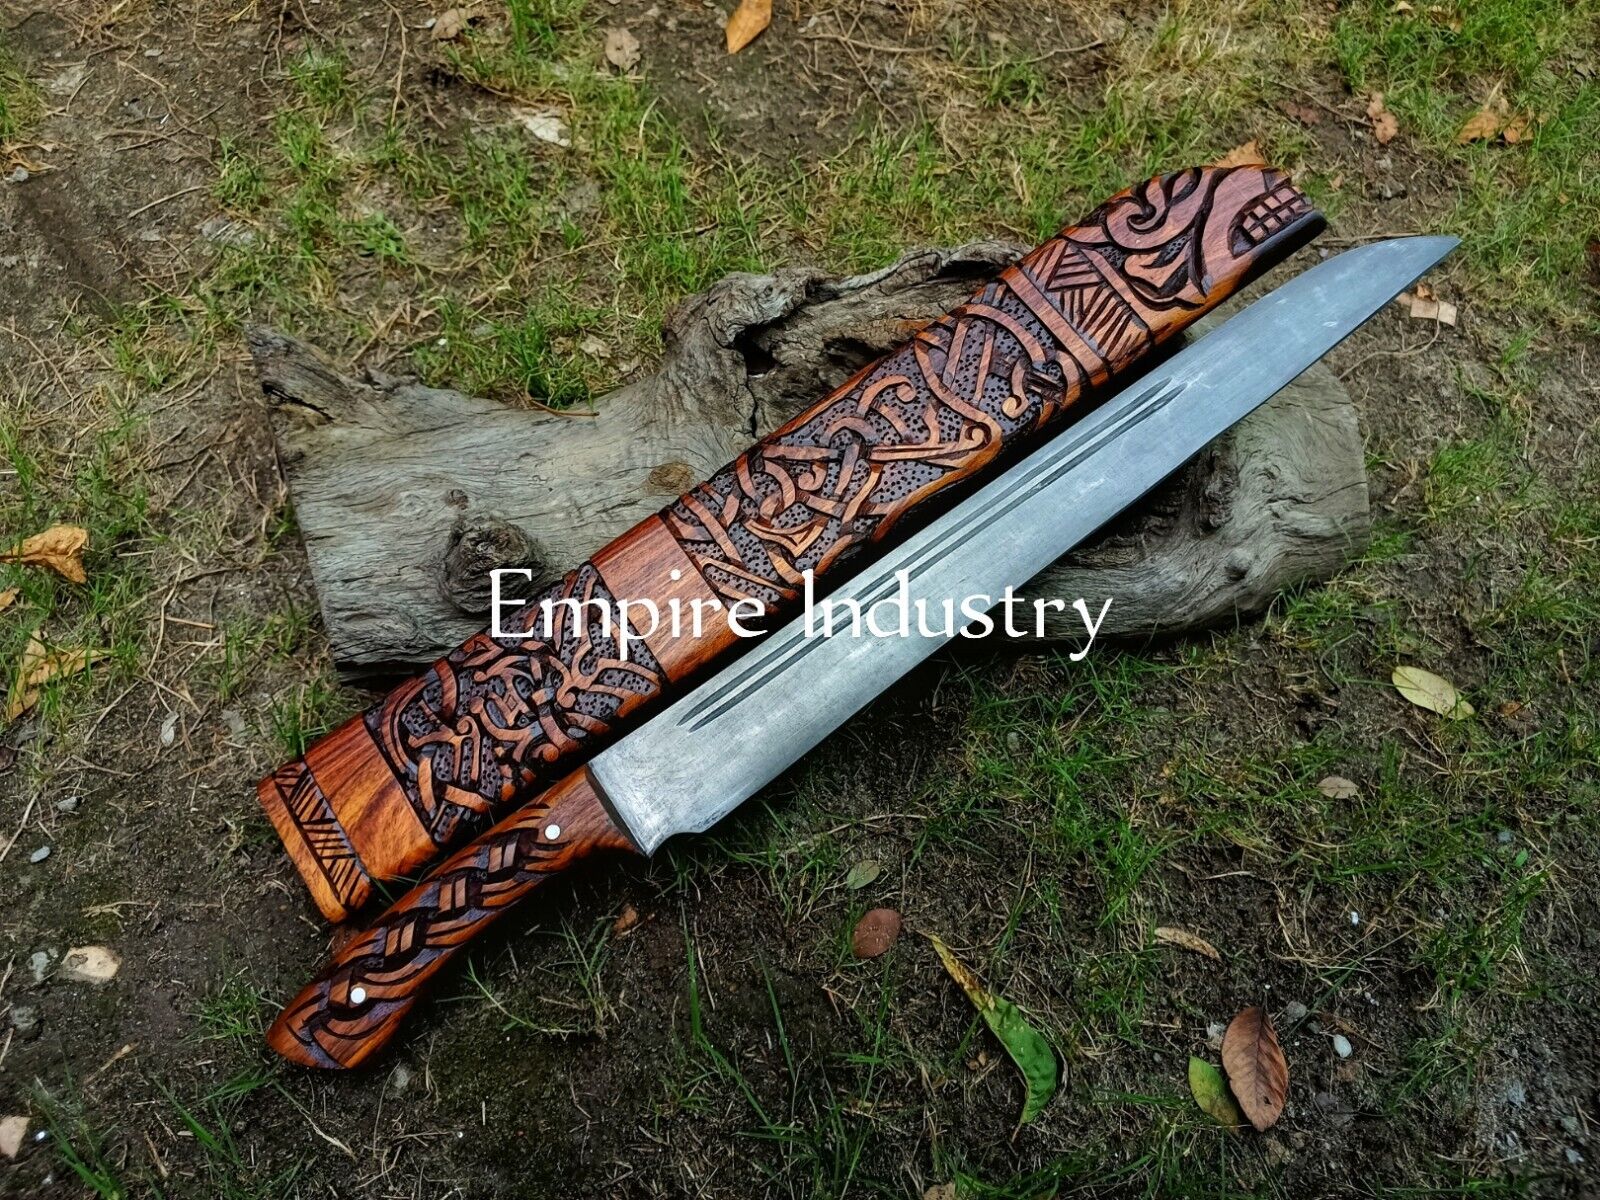 Handmade Spring Steel Full Tang Hunting Sword With Engraved Scabbard Fixed Blade